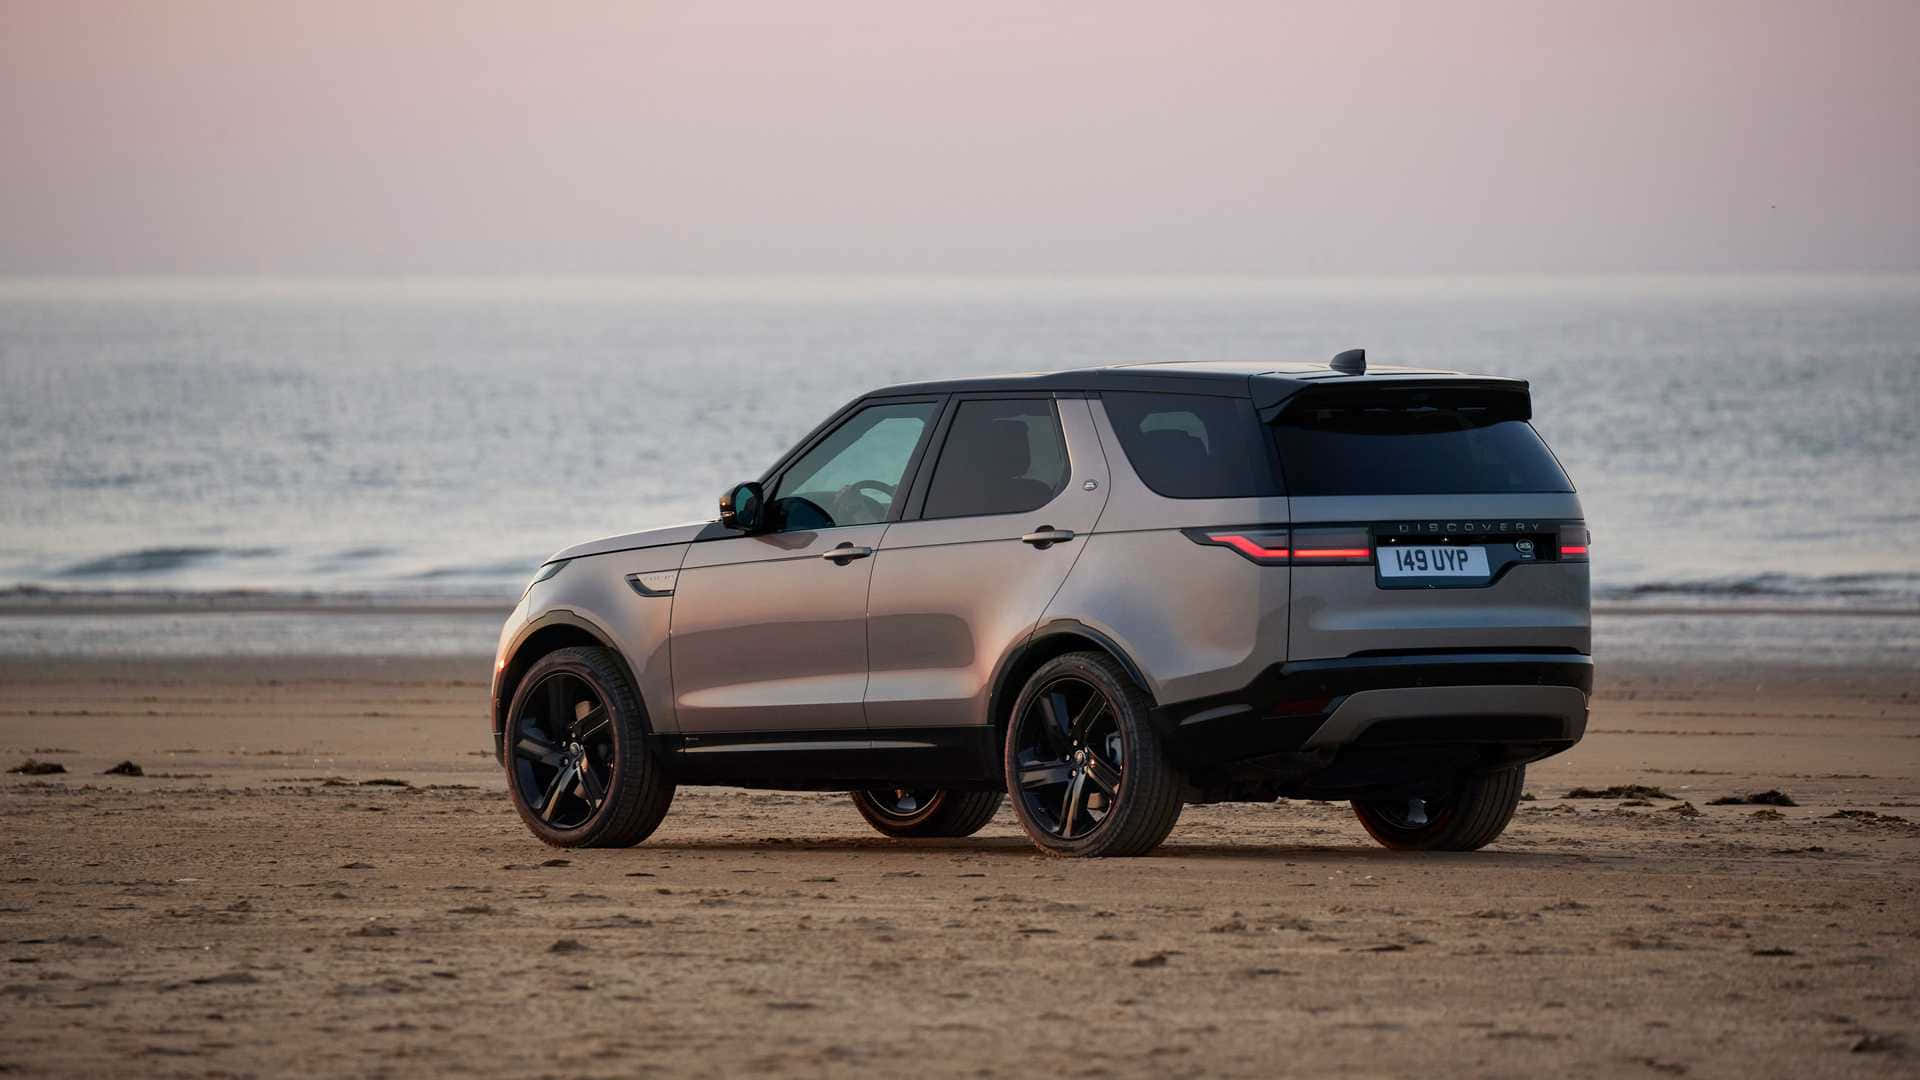 The Stunning Land Rover Discovery Wallpaper